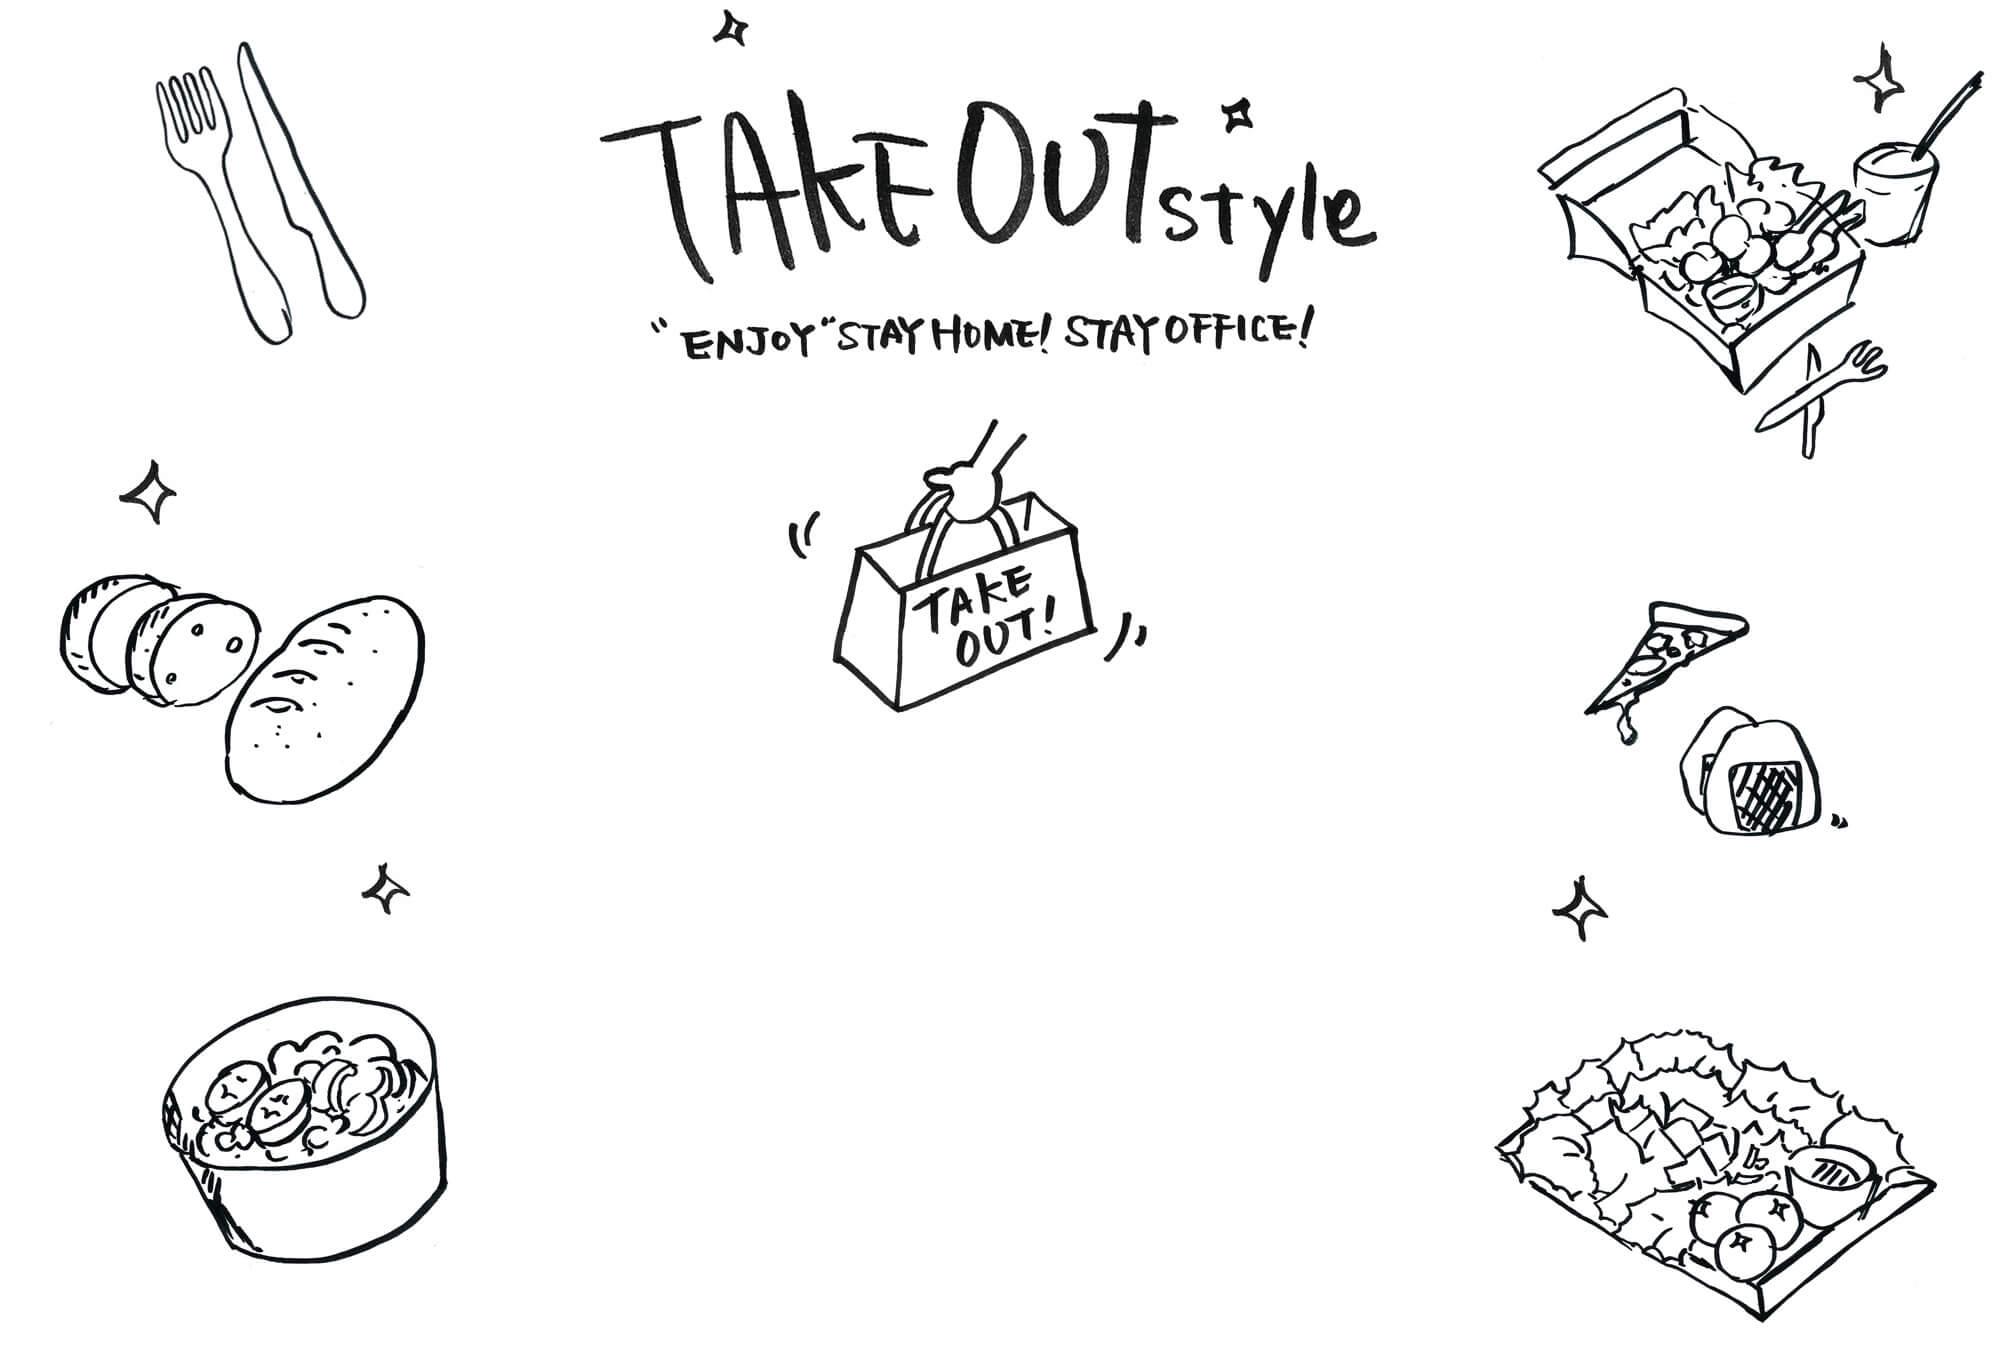 TAKEOUT style "ENJOY" STAY HOME! STAY OFFICE!